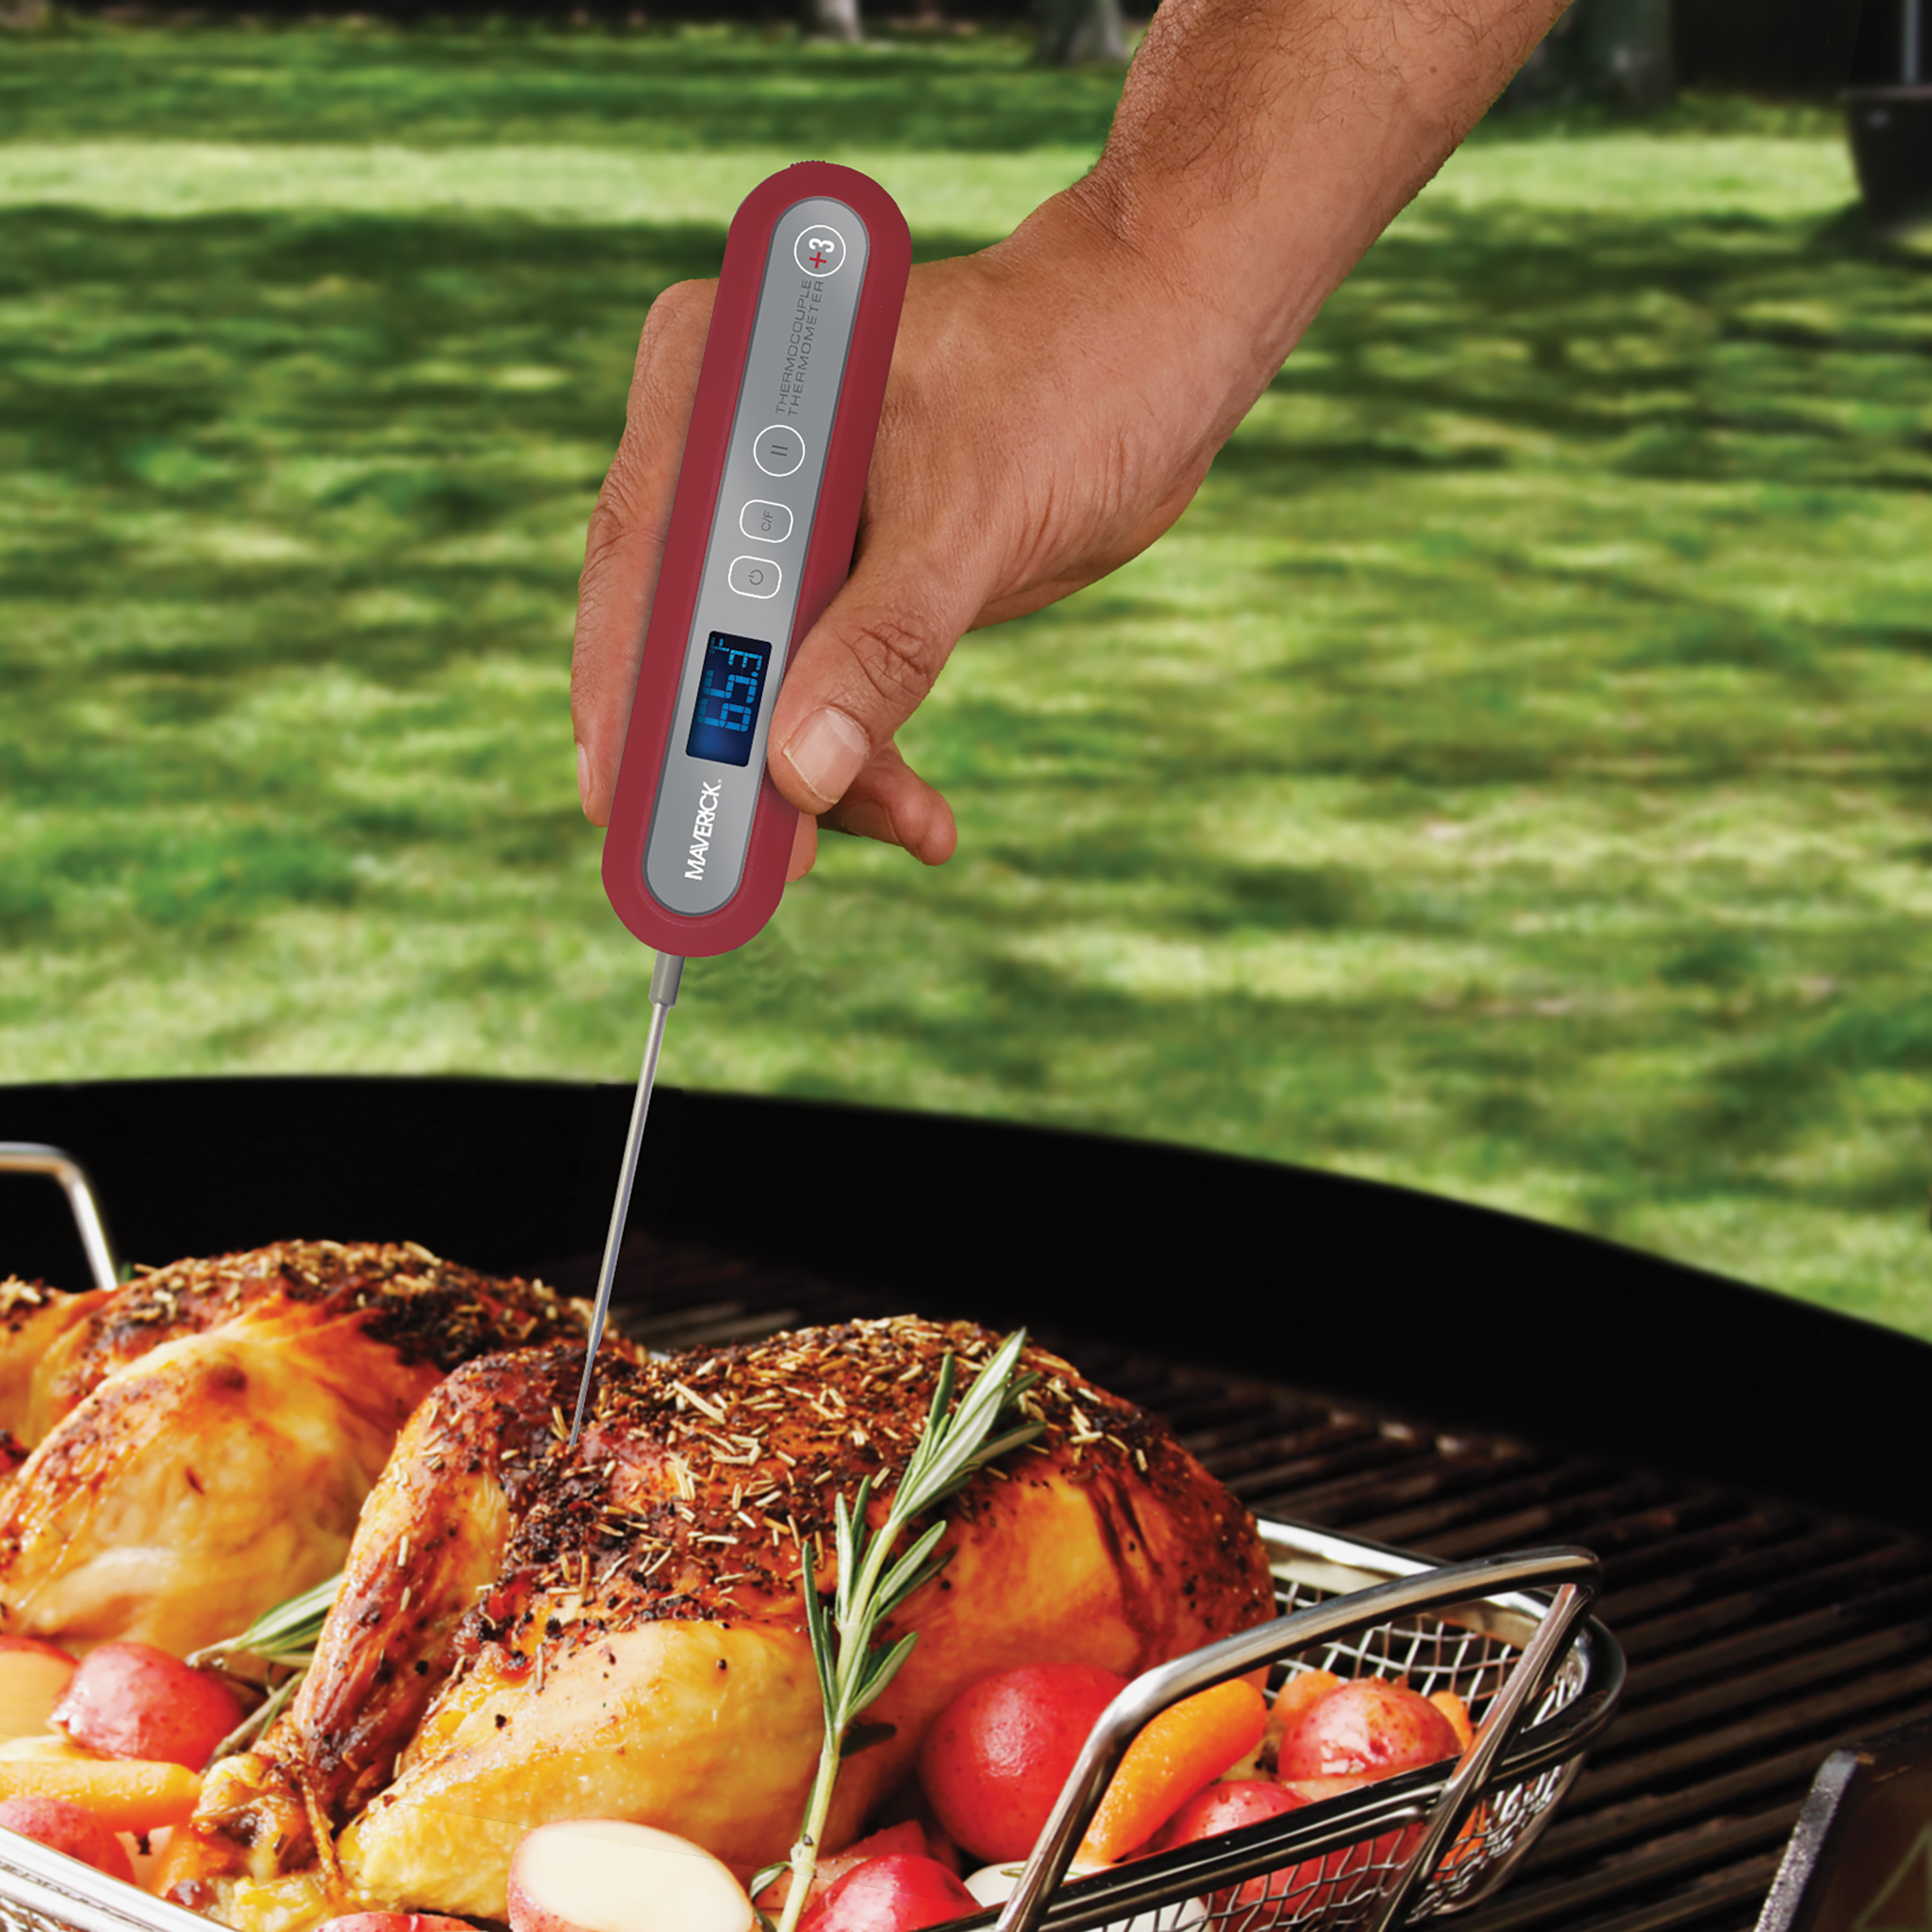 Big Green Egg Instant Read Thermometer with Bottle Opener